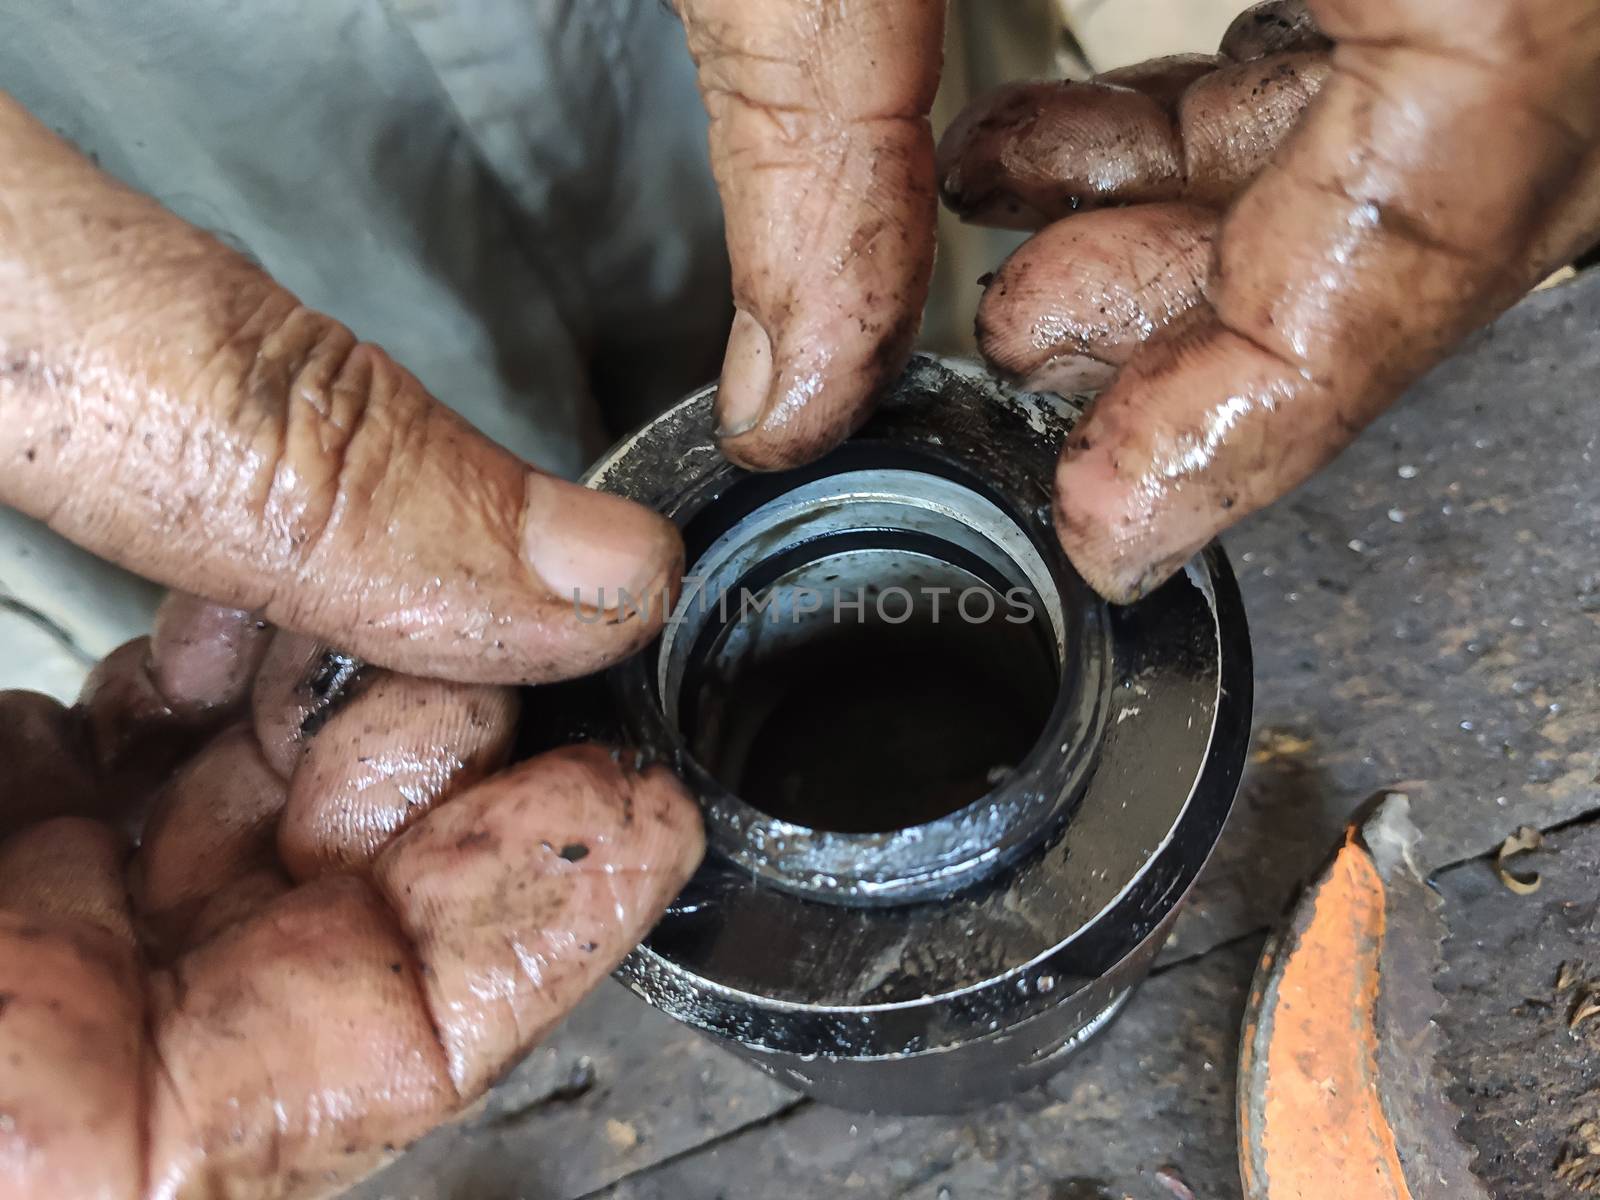 Dirty mechanic hands by pippocarlot